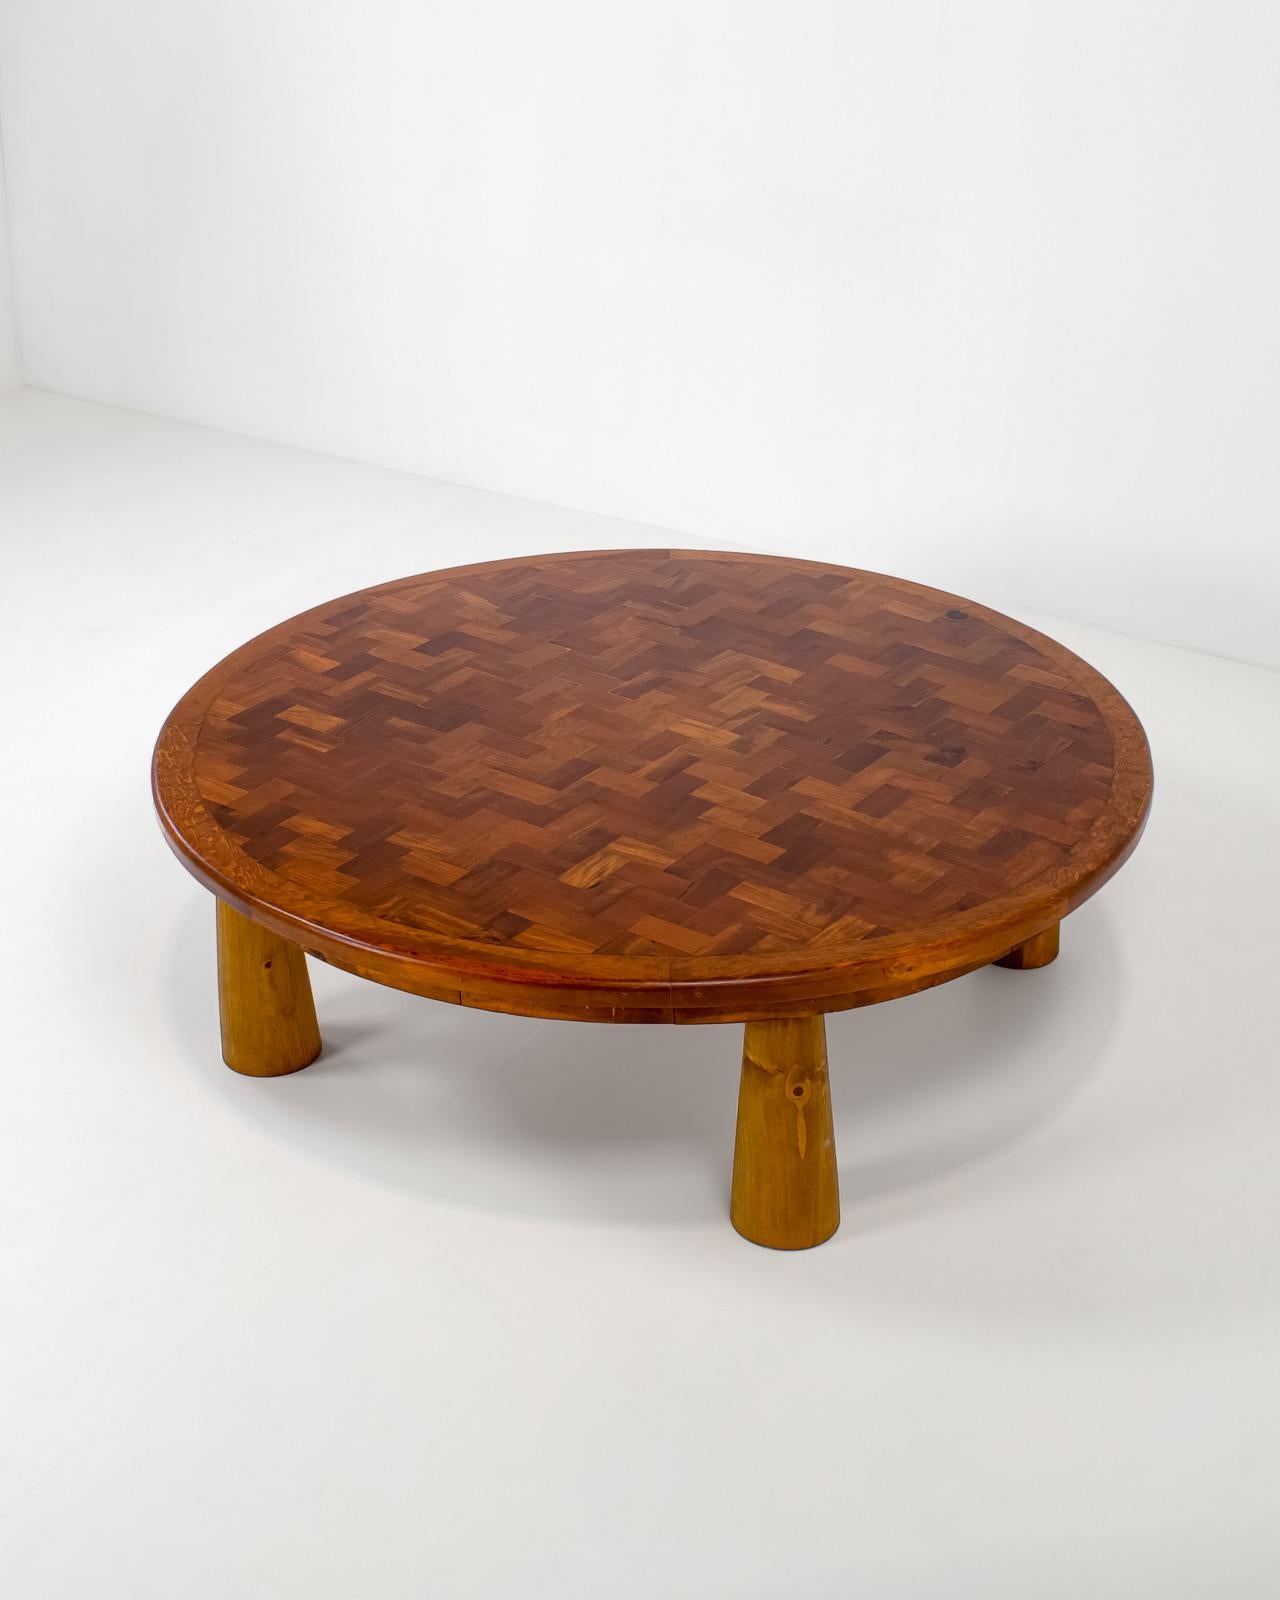 European 1950s, Large Round Parquet Coffee Table with Conical Legs, Spain